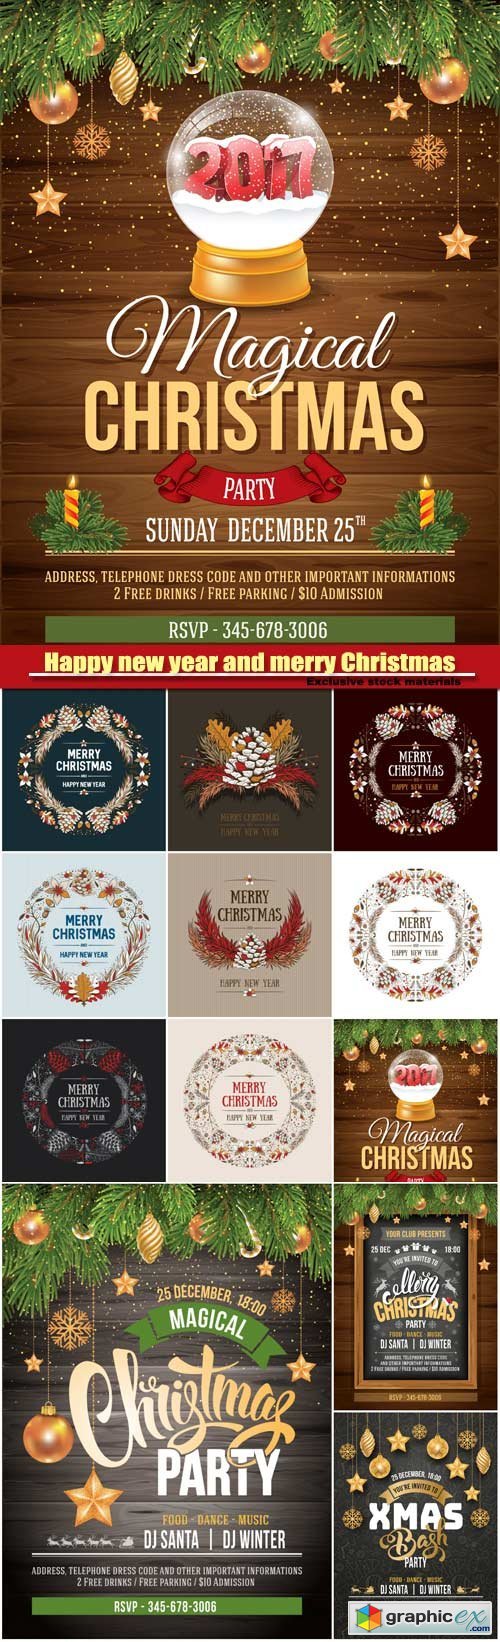 Frame Christmas design, luxury template design for Christmas party